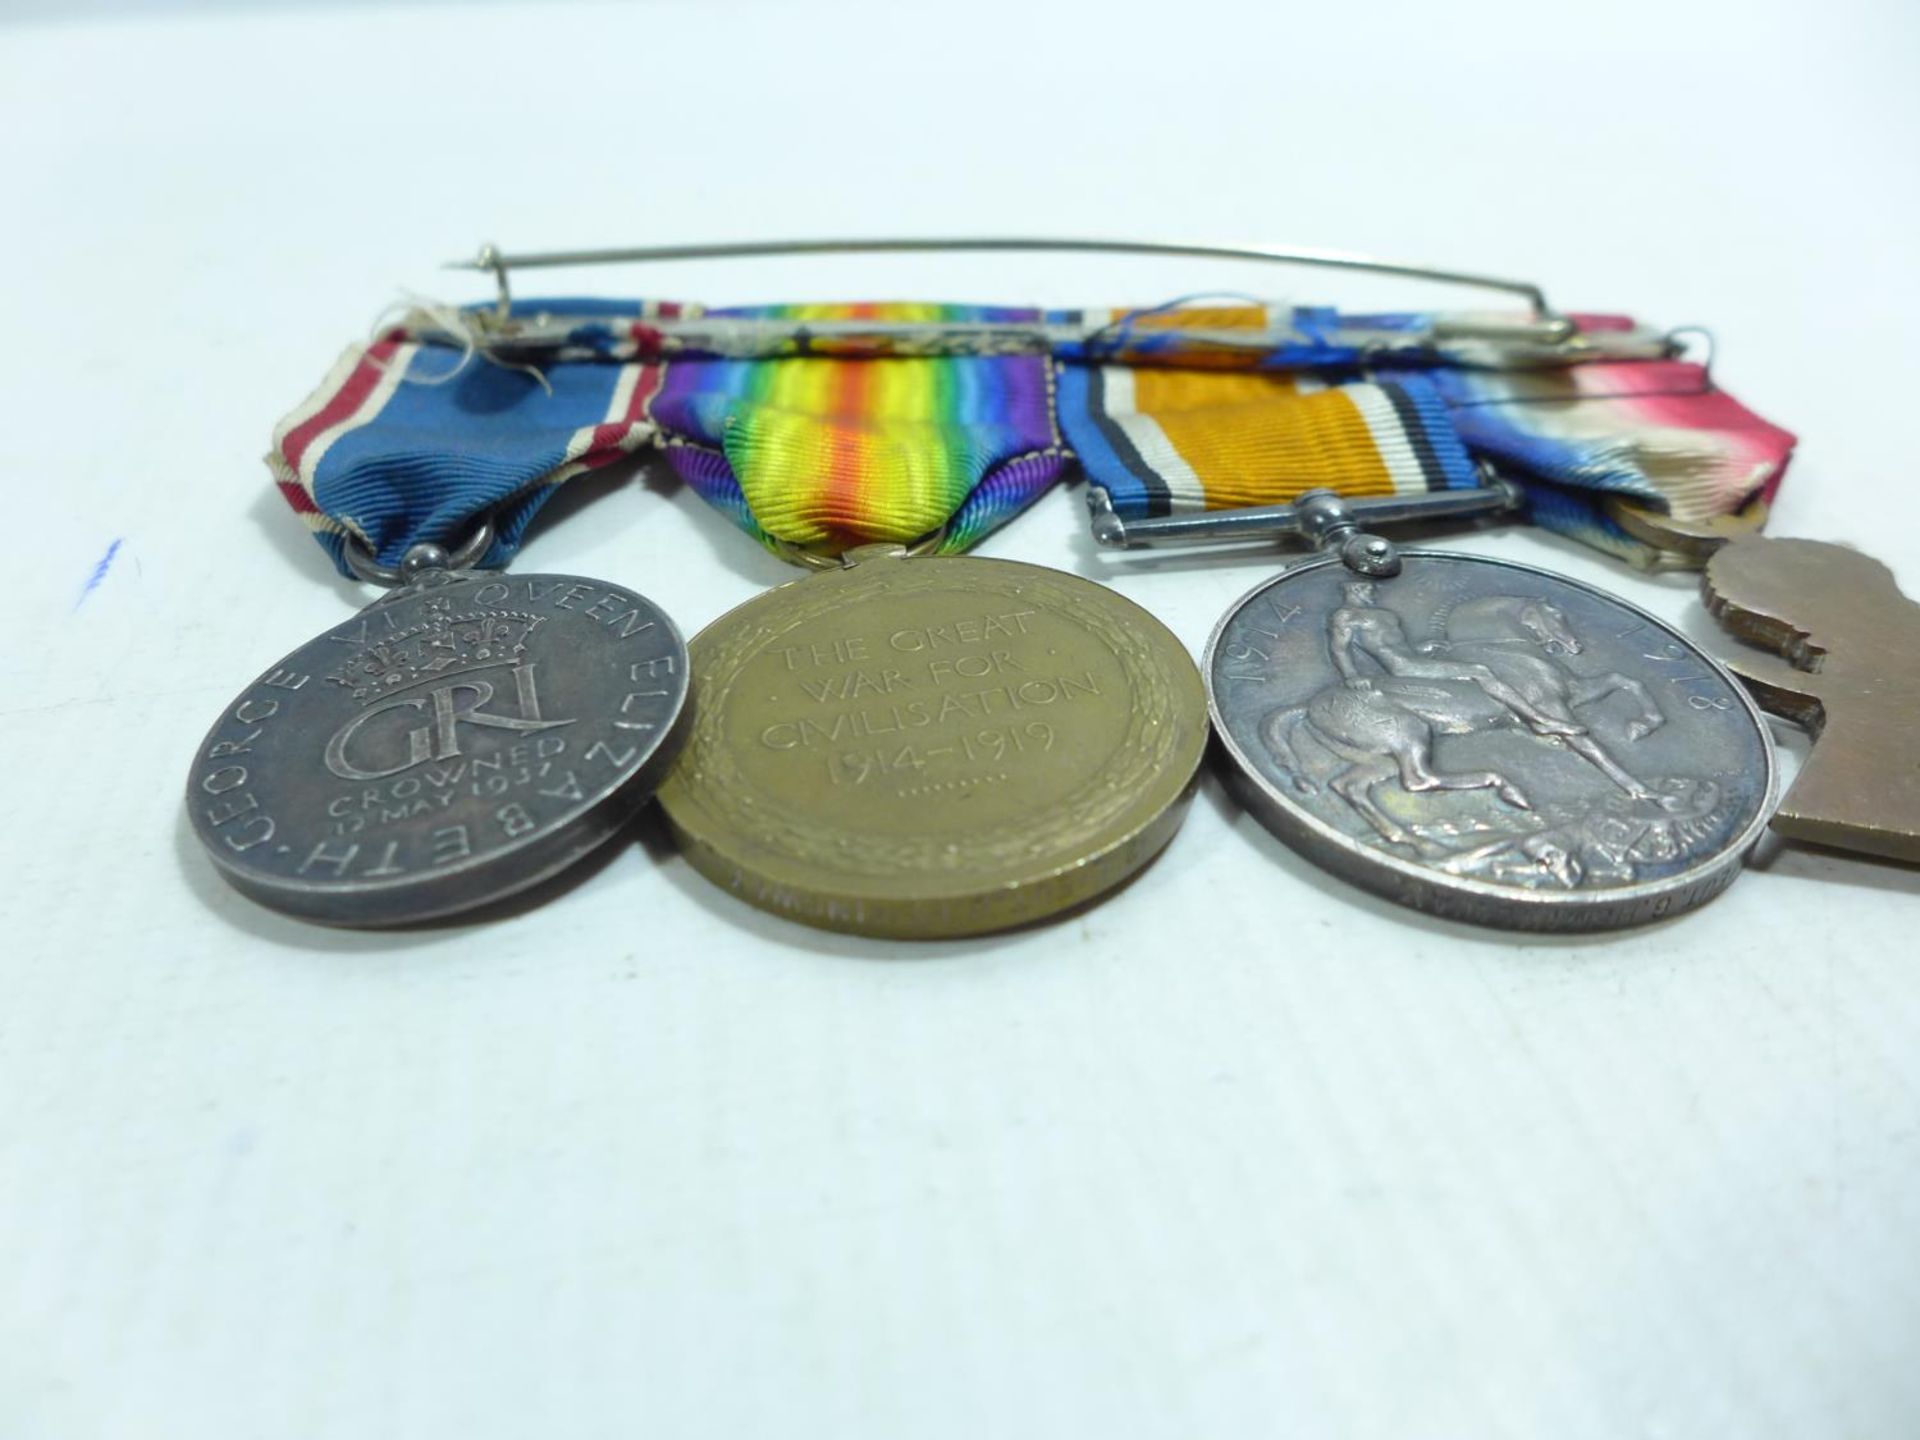 A WORLD WAR I MEDAL GROUP AWARDED TO 28797 2ND LIEUTENANT G HEMINGWAY OF THE ROYAL ENGINEERS, - Image 6 of 6